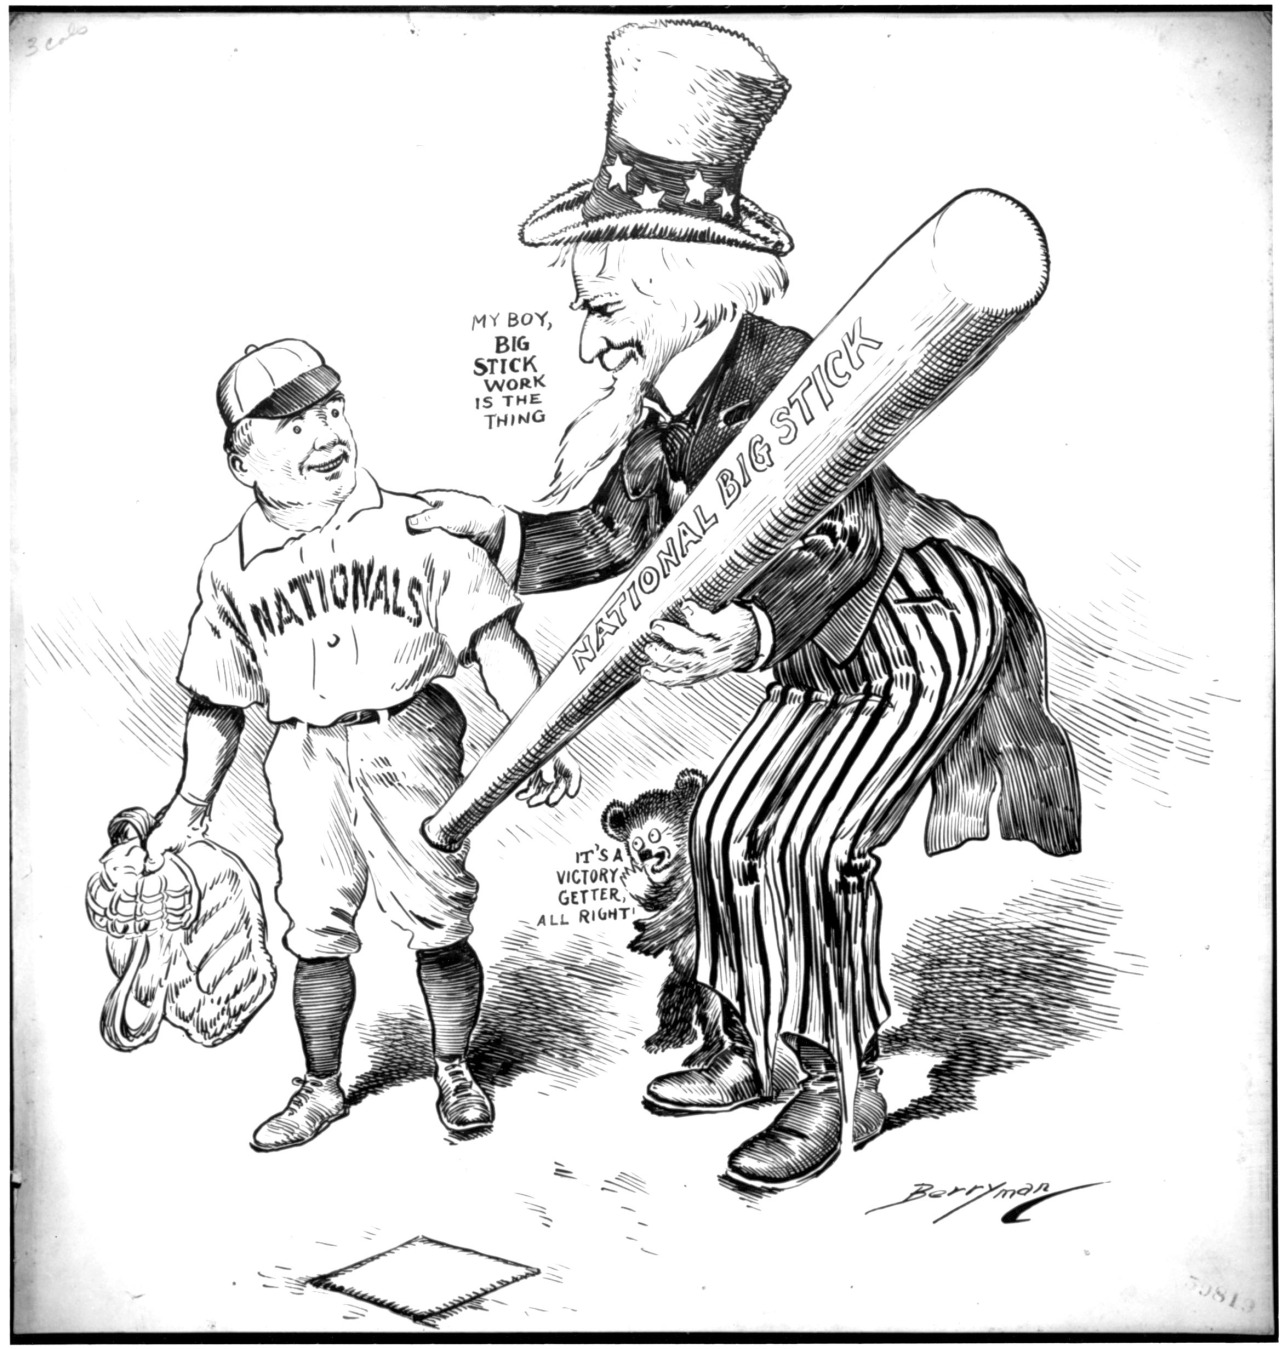 todaysdocument:
“ Let’s Go Nats! The Washington Nationals’ first playoff game is tonight against the Los Angeles Dodgers. It’s clear who Uncle Sam is cheering for!
“ [Untitled]
Series: Berryman Political Cartoon Collection, 1896 - 1949
Record Group...